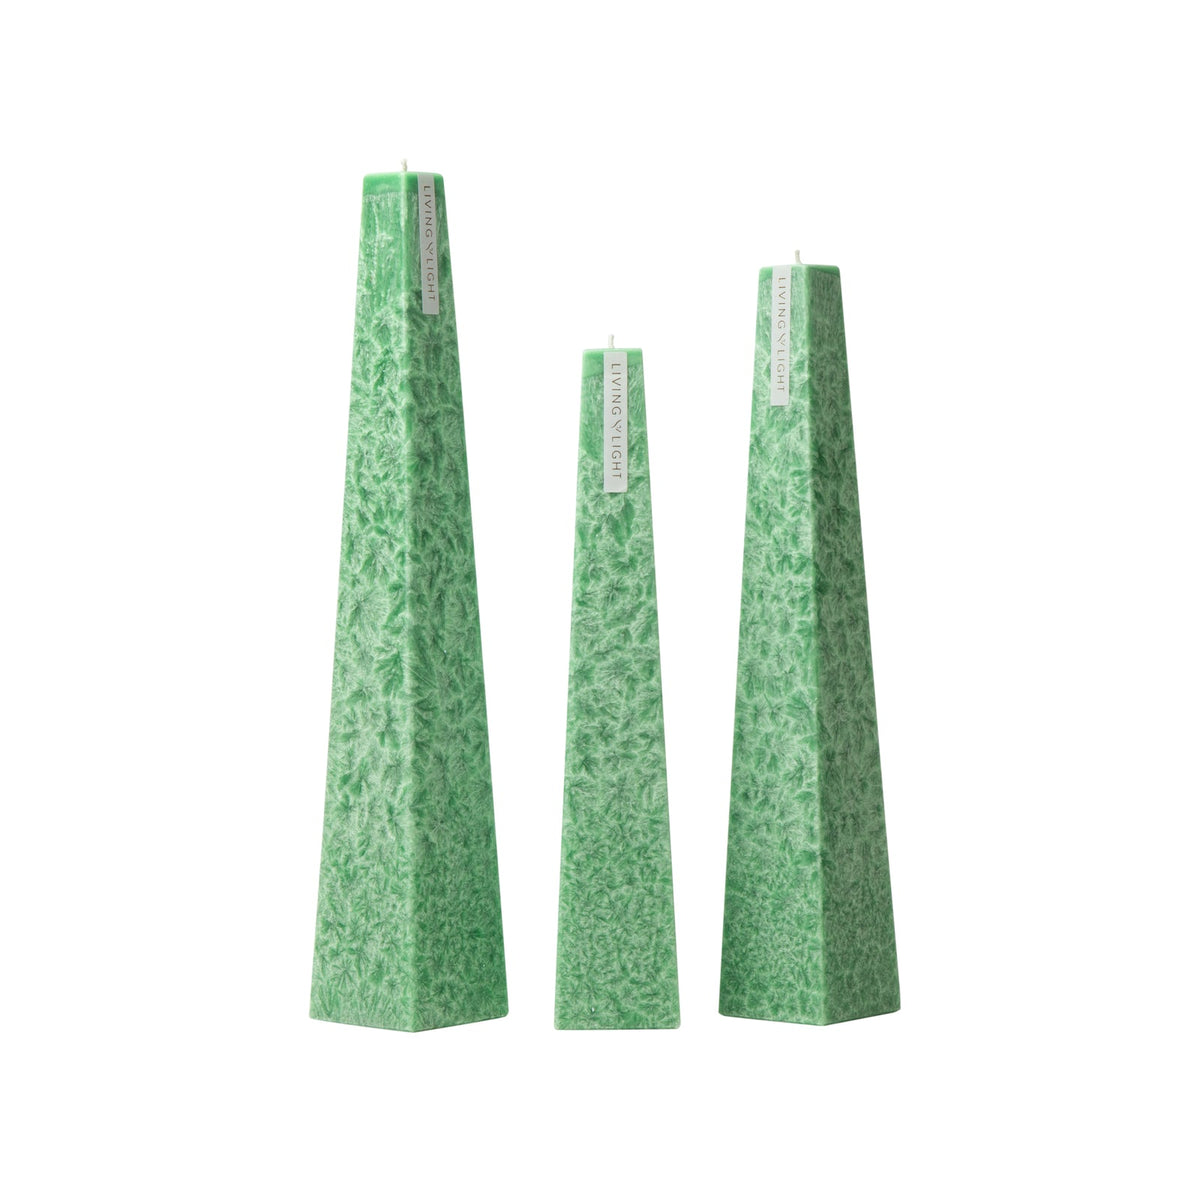 Icicle Candles - Festive Pine Icicles